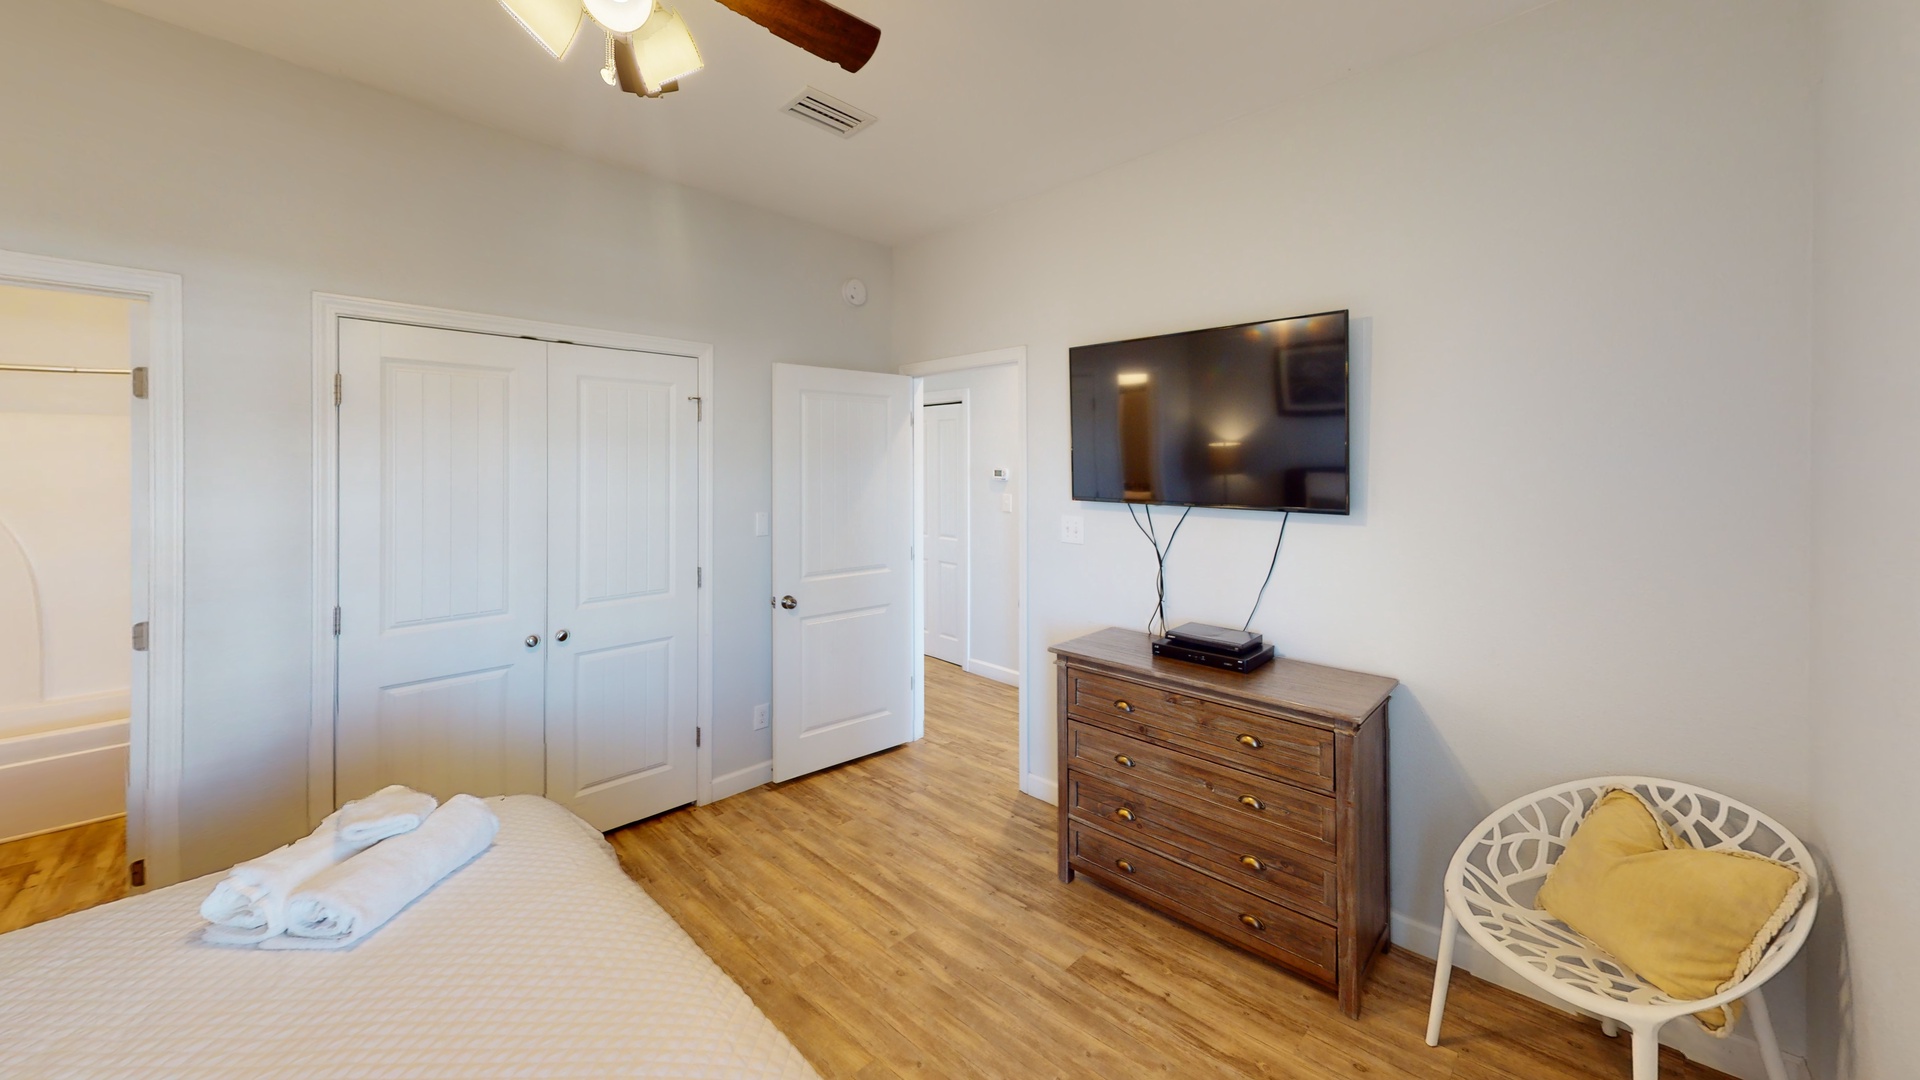 Bedroom 2 comes with a ceiling fan, TV and a private bathroom